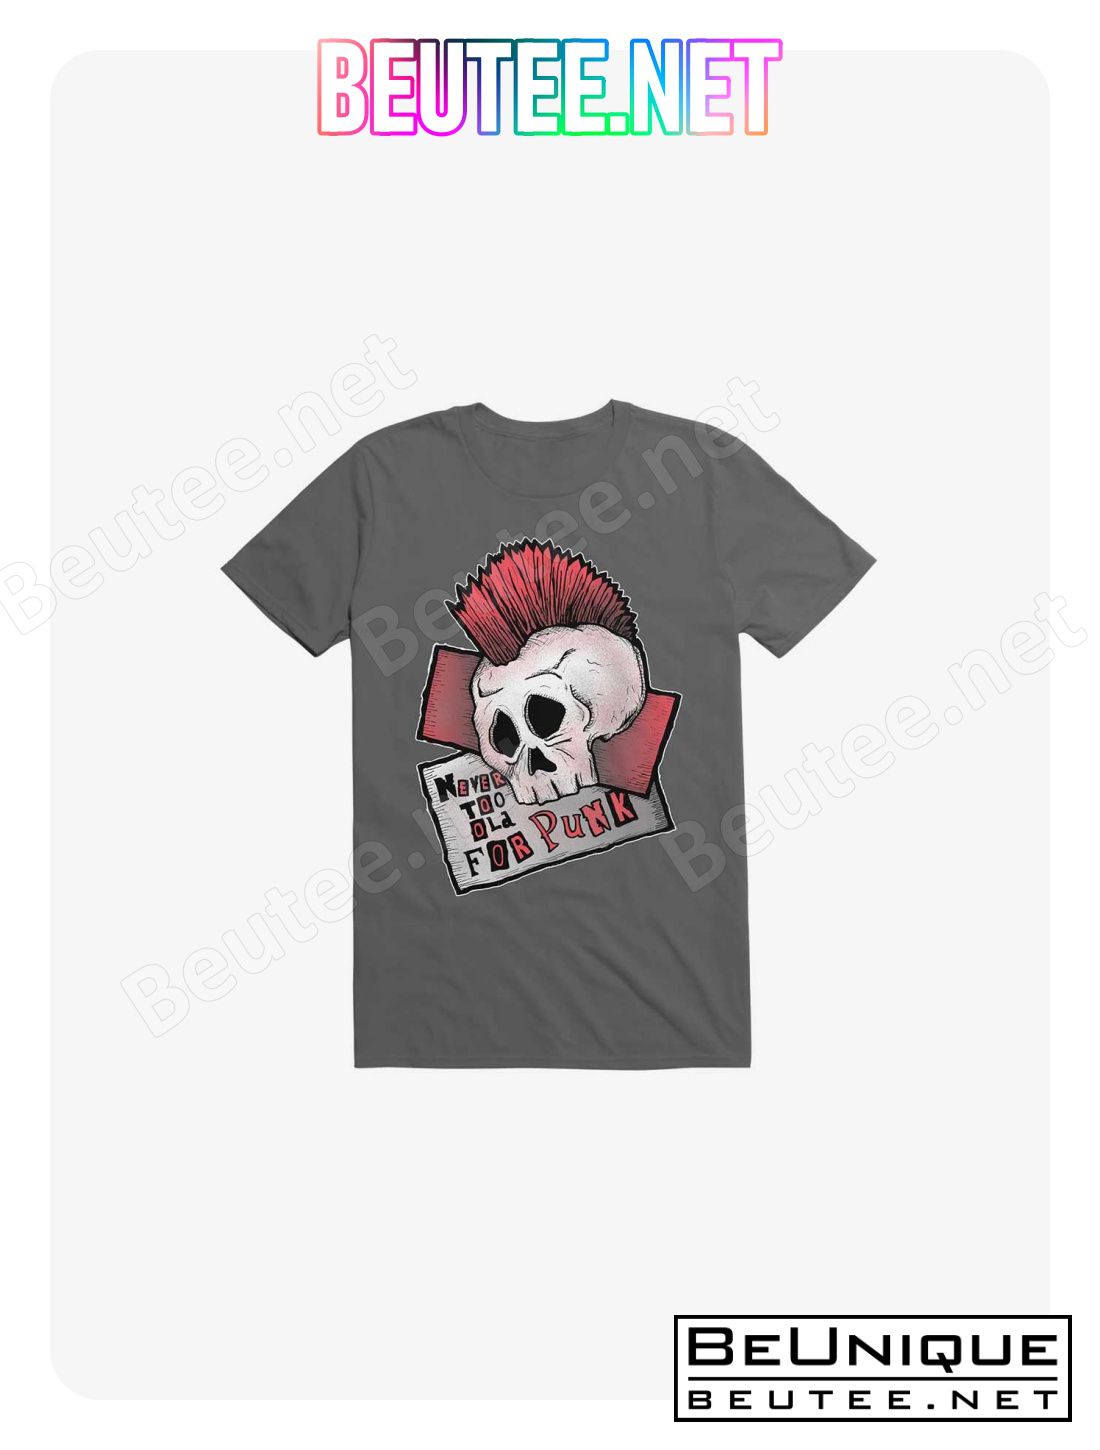 Never Too Old For Punk! T-Shirt